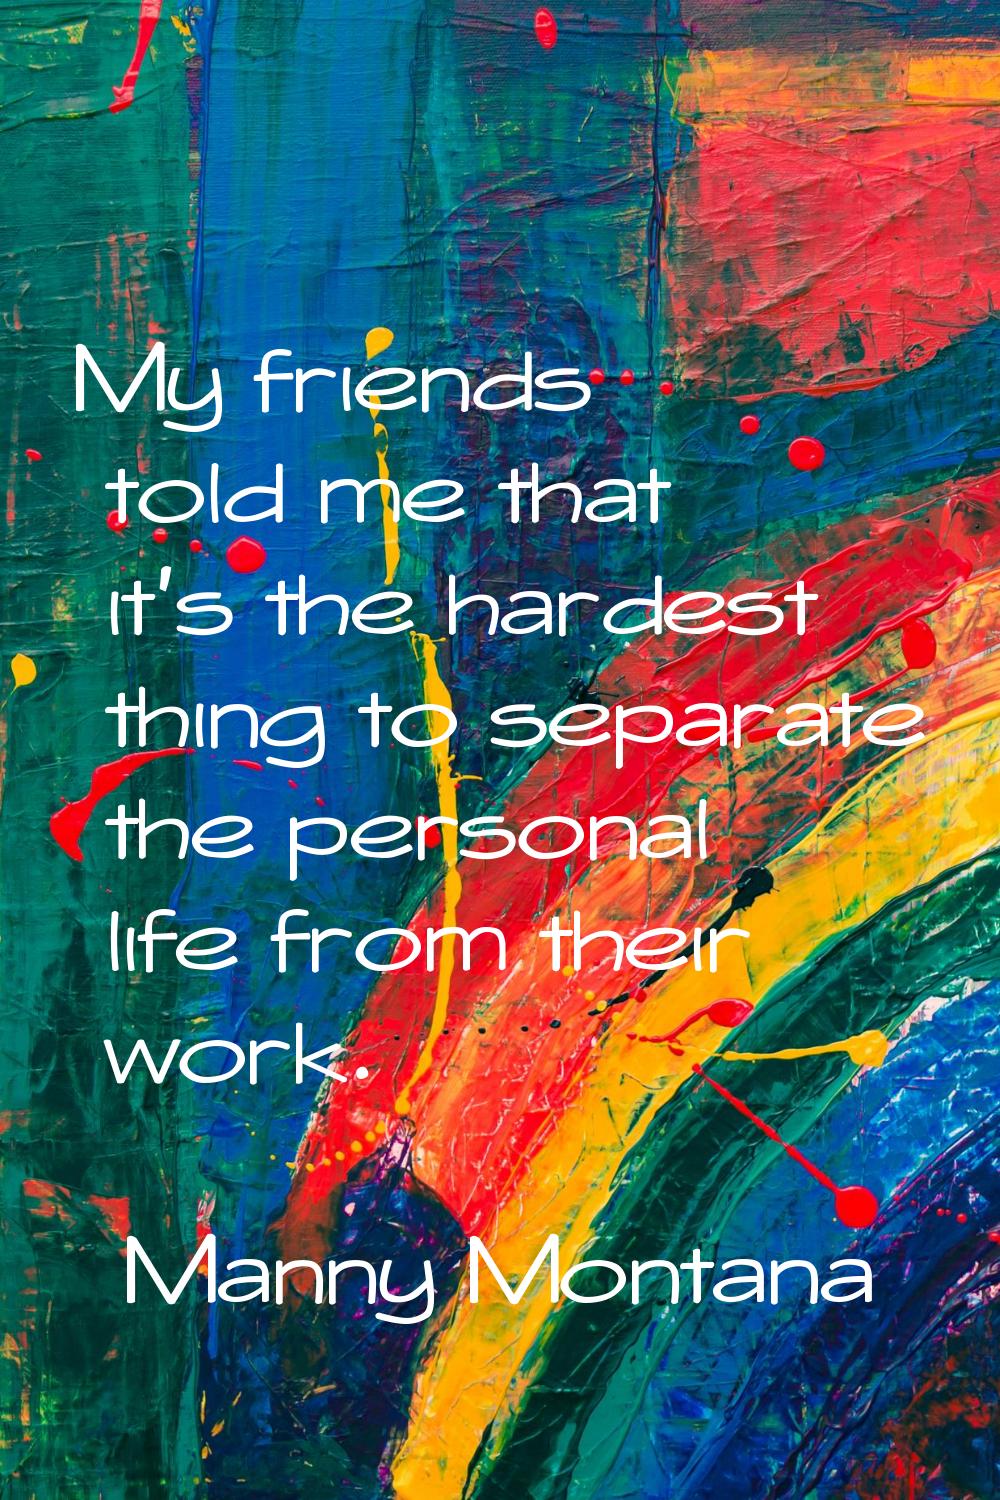 My friends told me that it's the hardest thing to separate the personal life from their work.